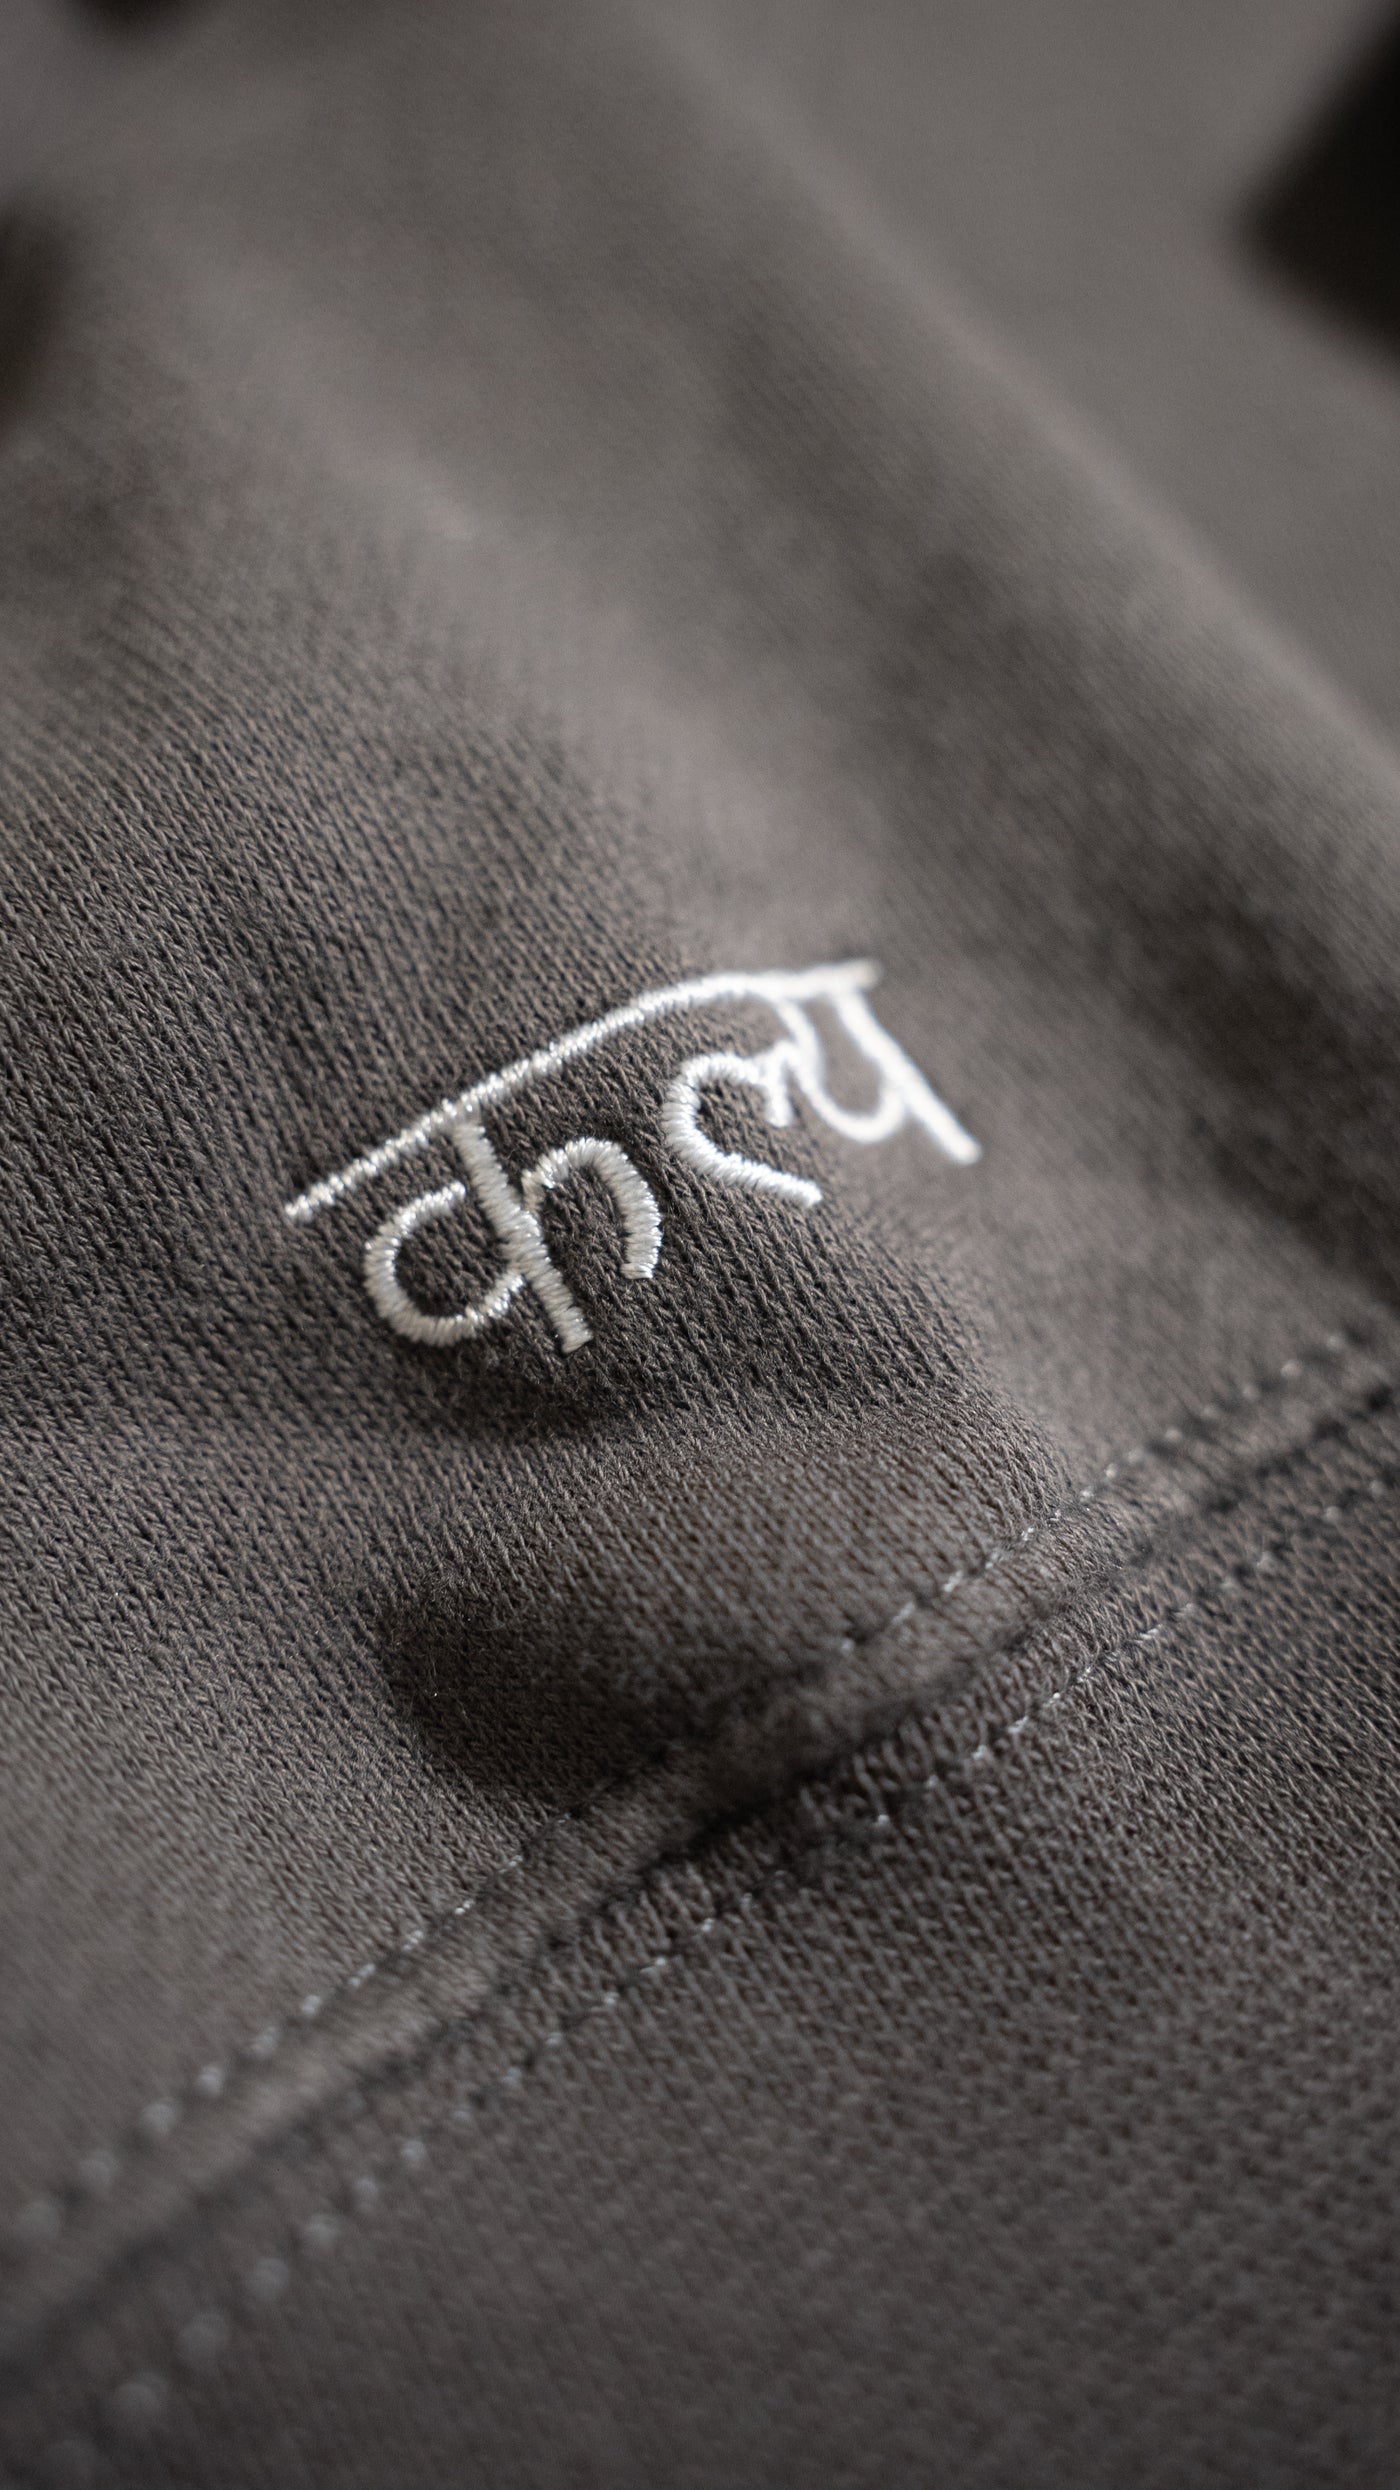 Charcoal Gray Kalya Embroidered Pullover Jacket